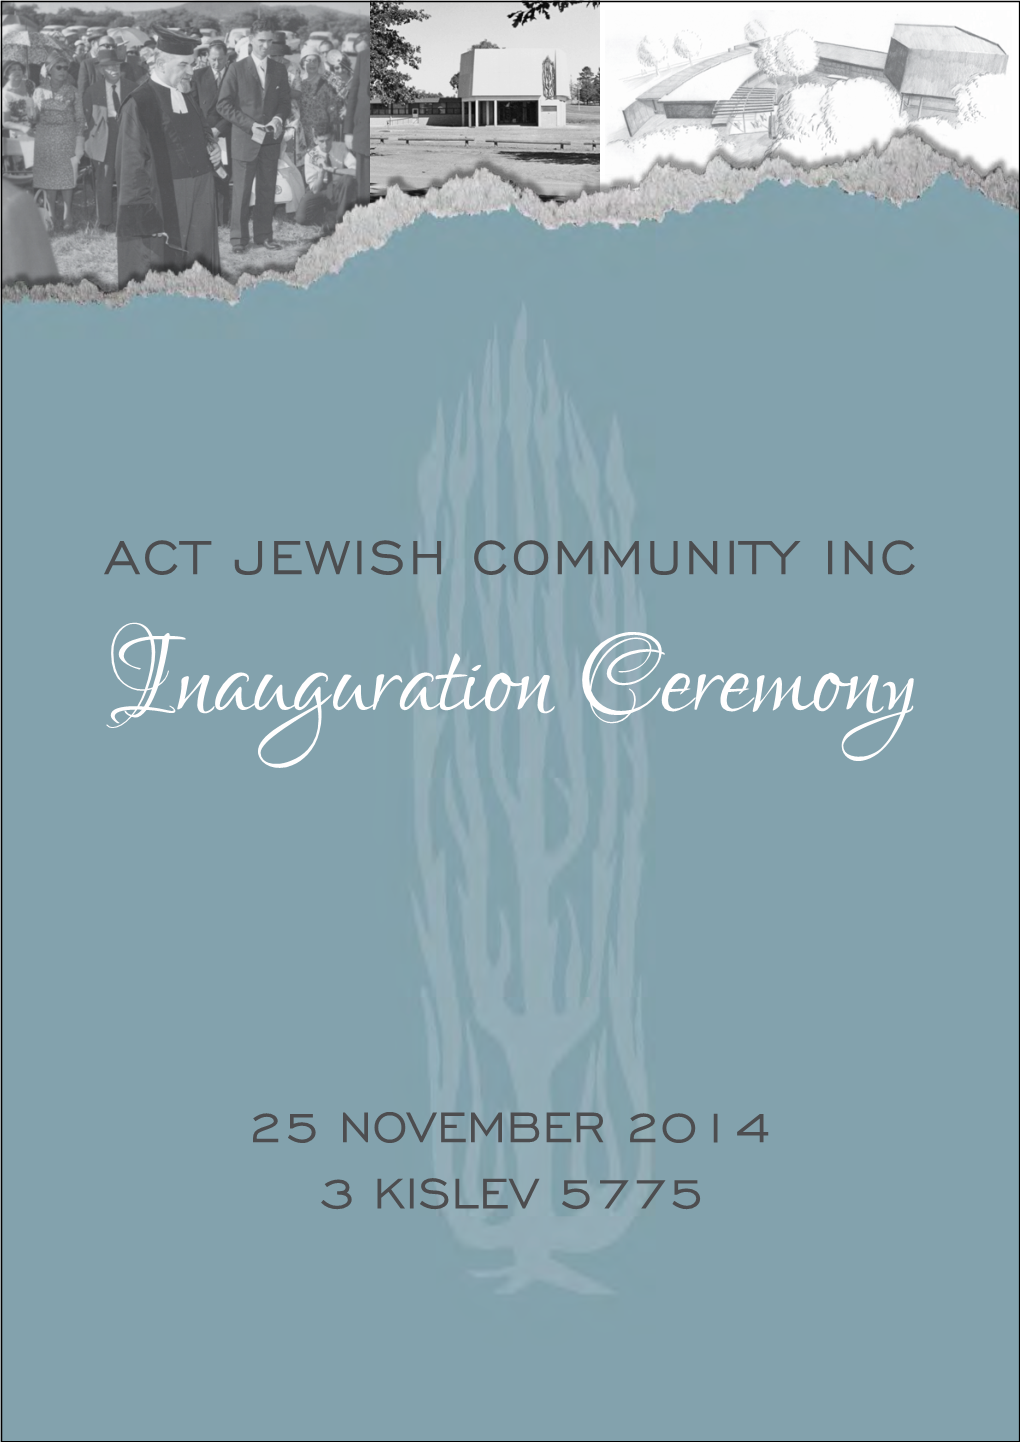 Act Jewish Community Inc William Cole Funerals Caring for the Jewish Community in Canberra Since 1999